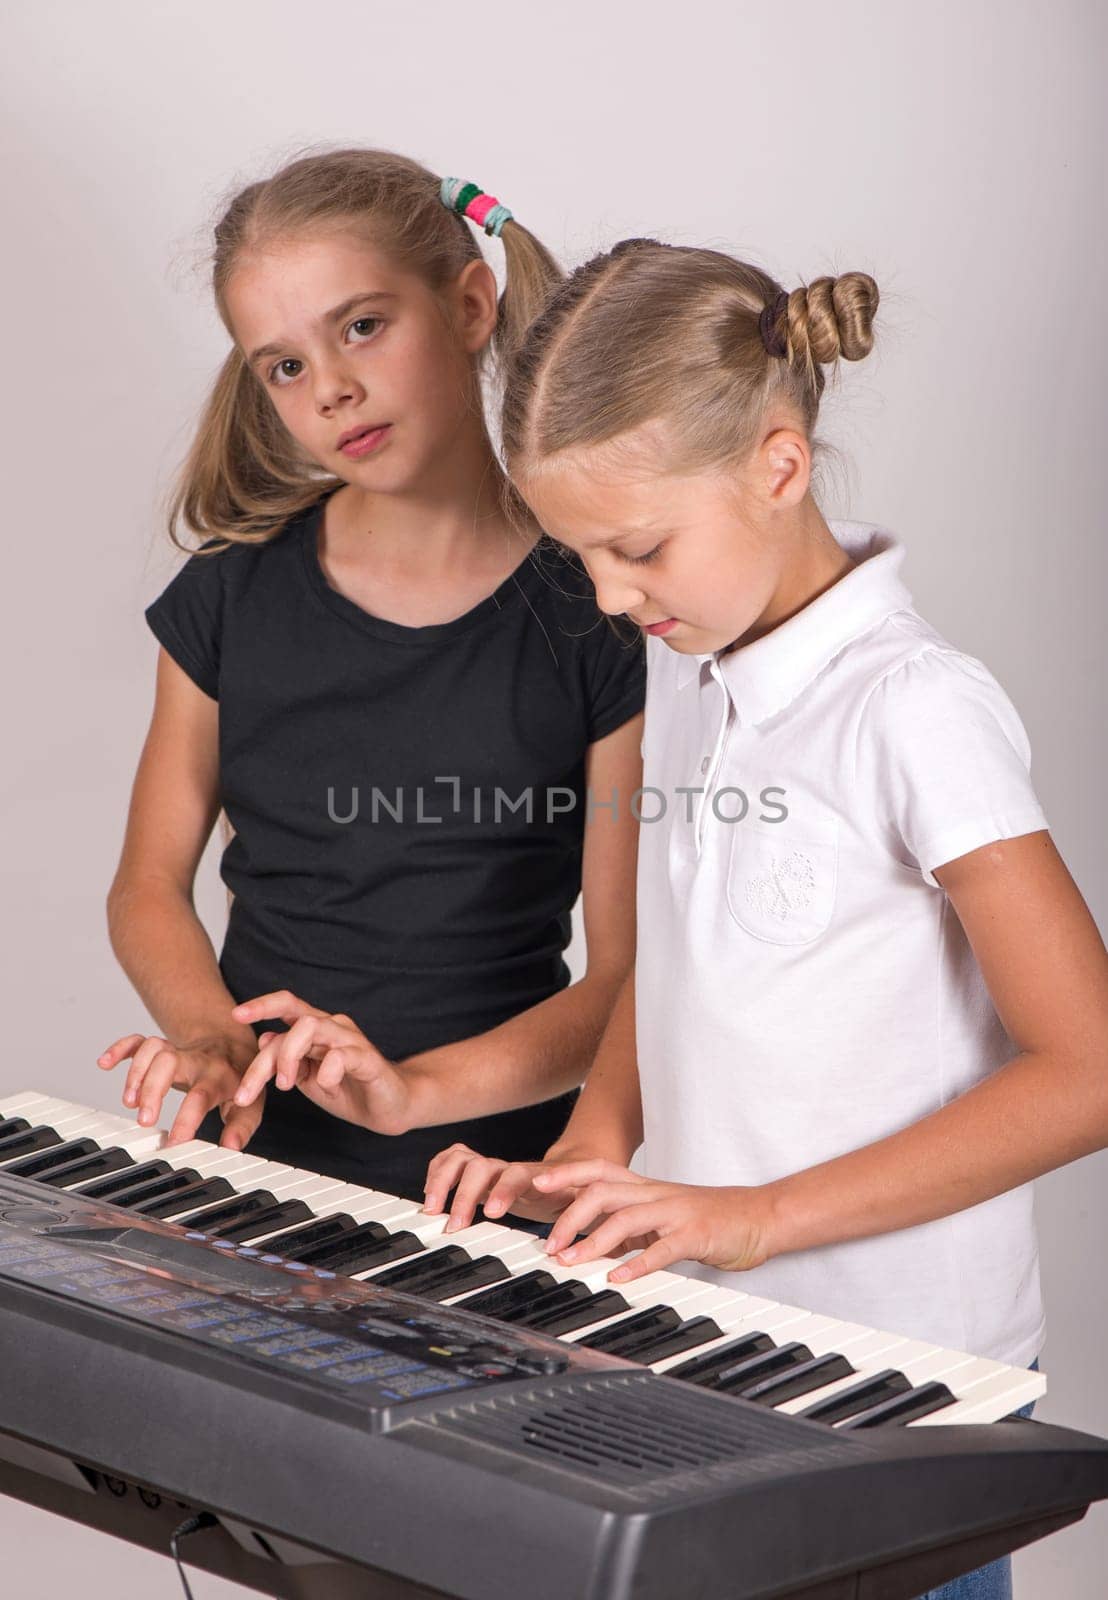 Music class in school or at home. Two girls playing piano. Kids play music. Classical education for children. art lesson. Little girl at digital keyboard. Instrument for young student.